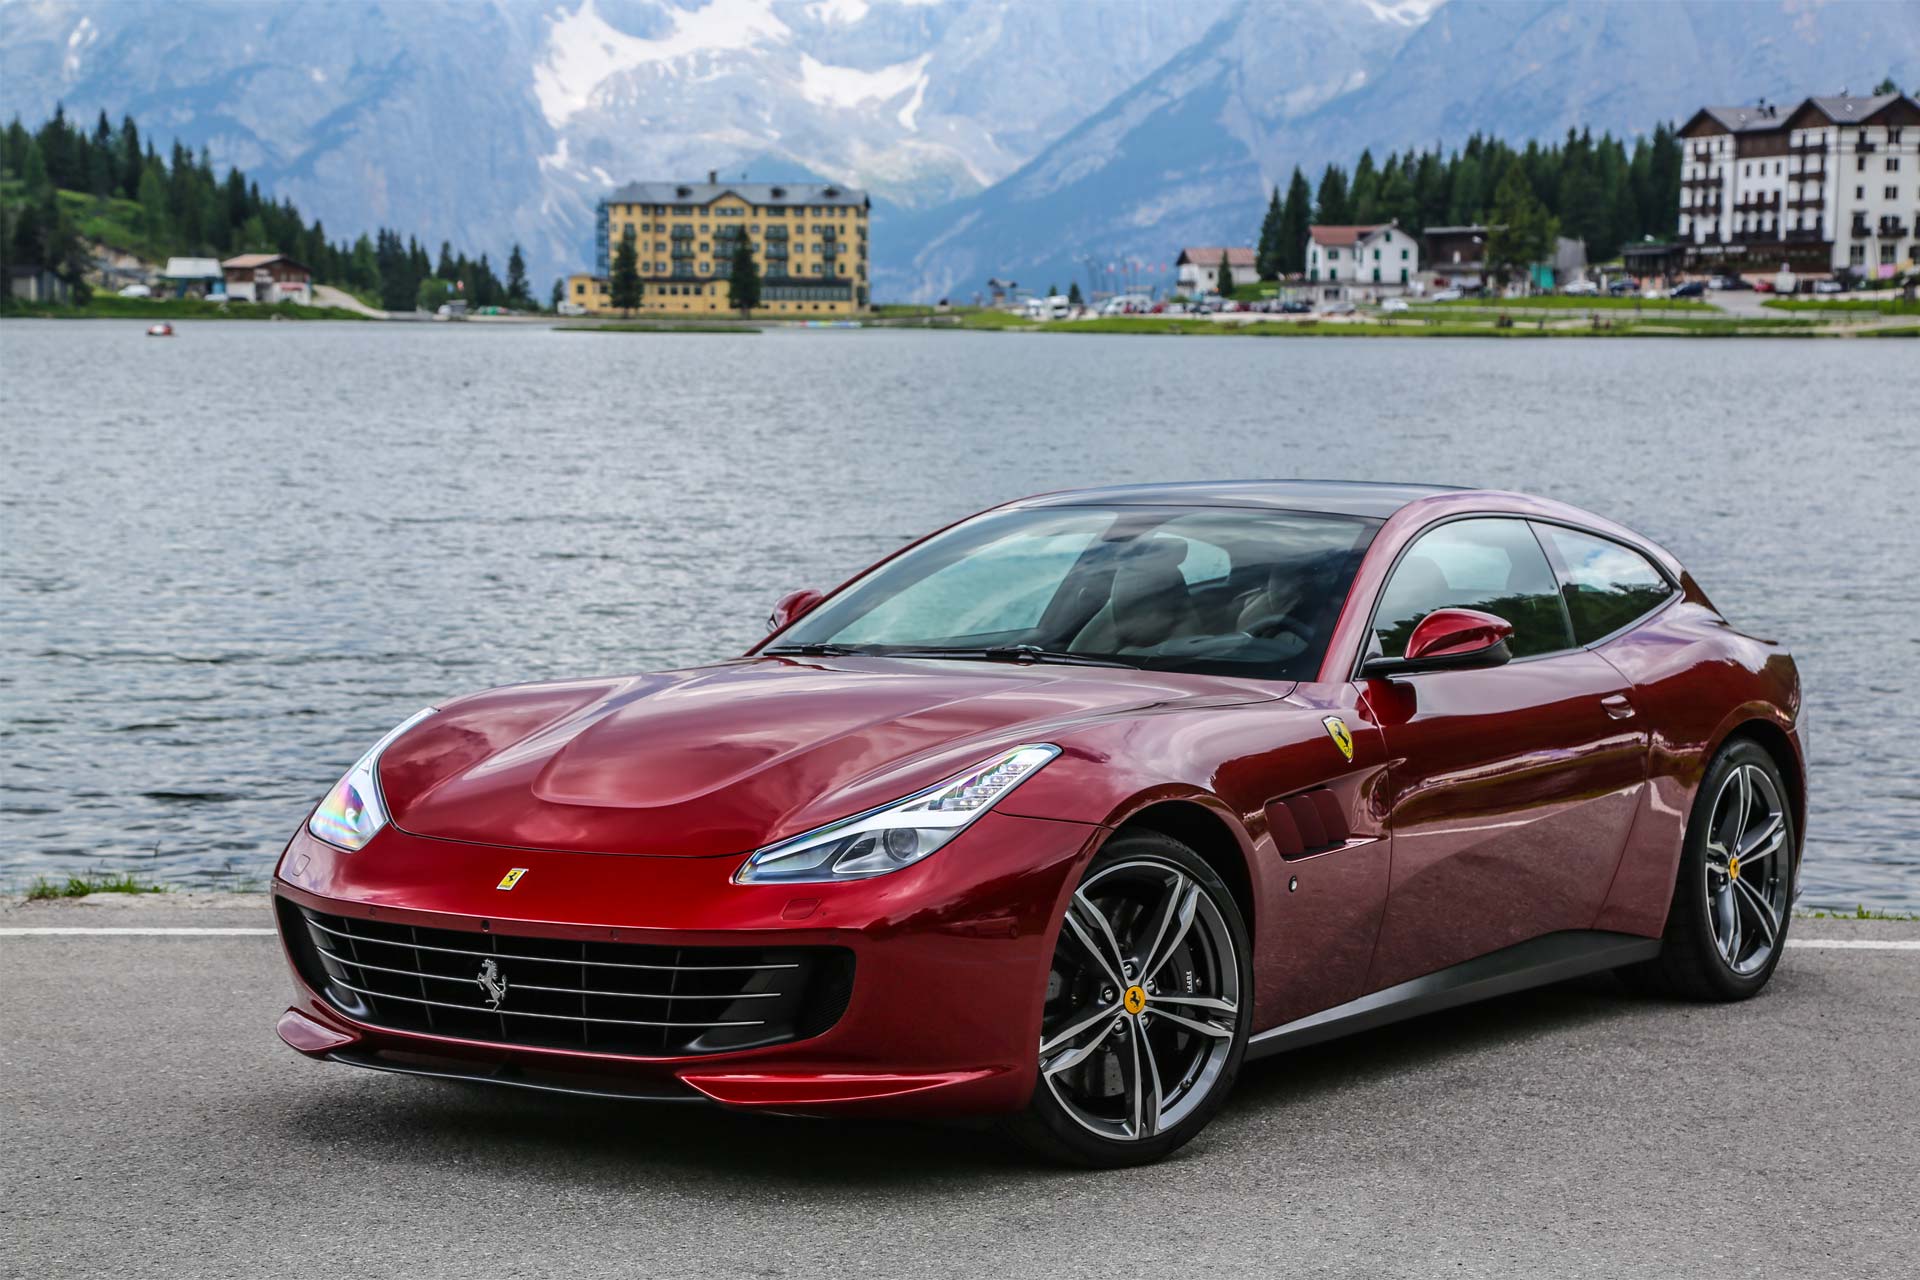 Ferrari GTC4Lusso and GTC4Lusso T launched In India